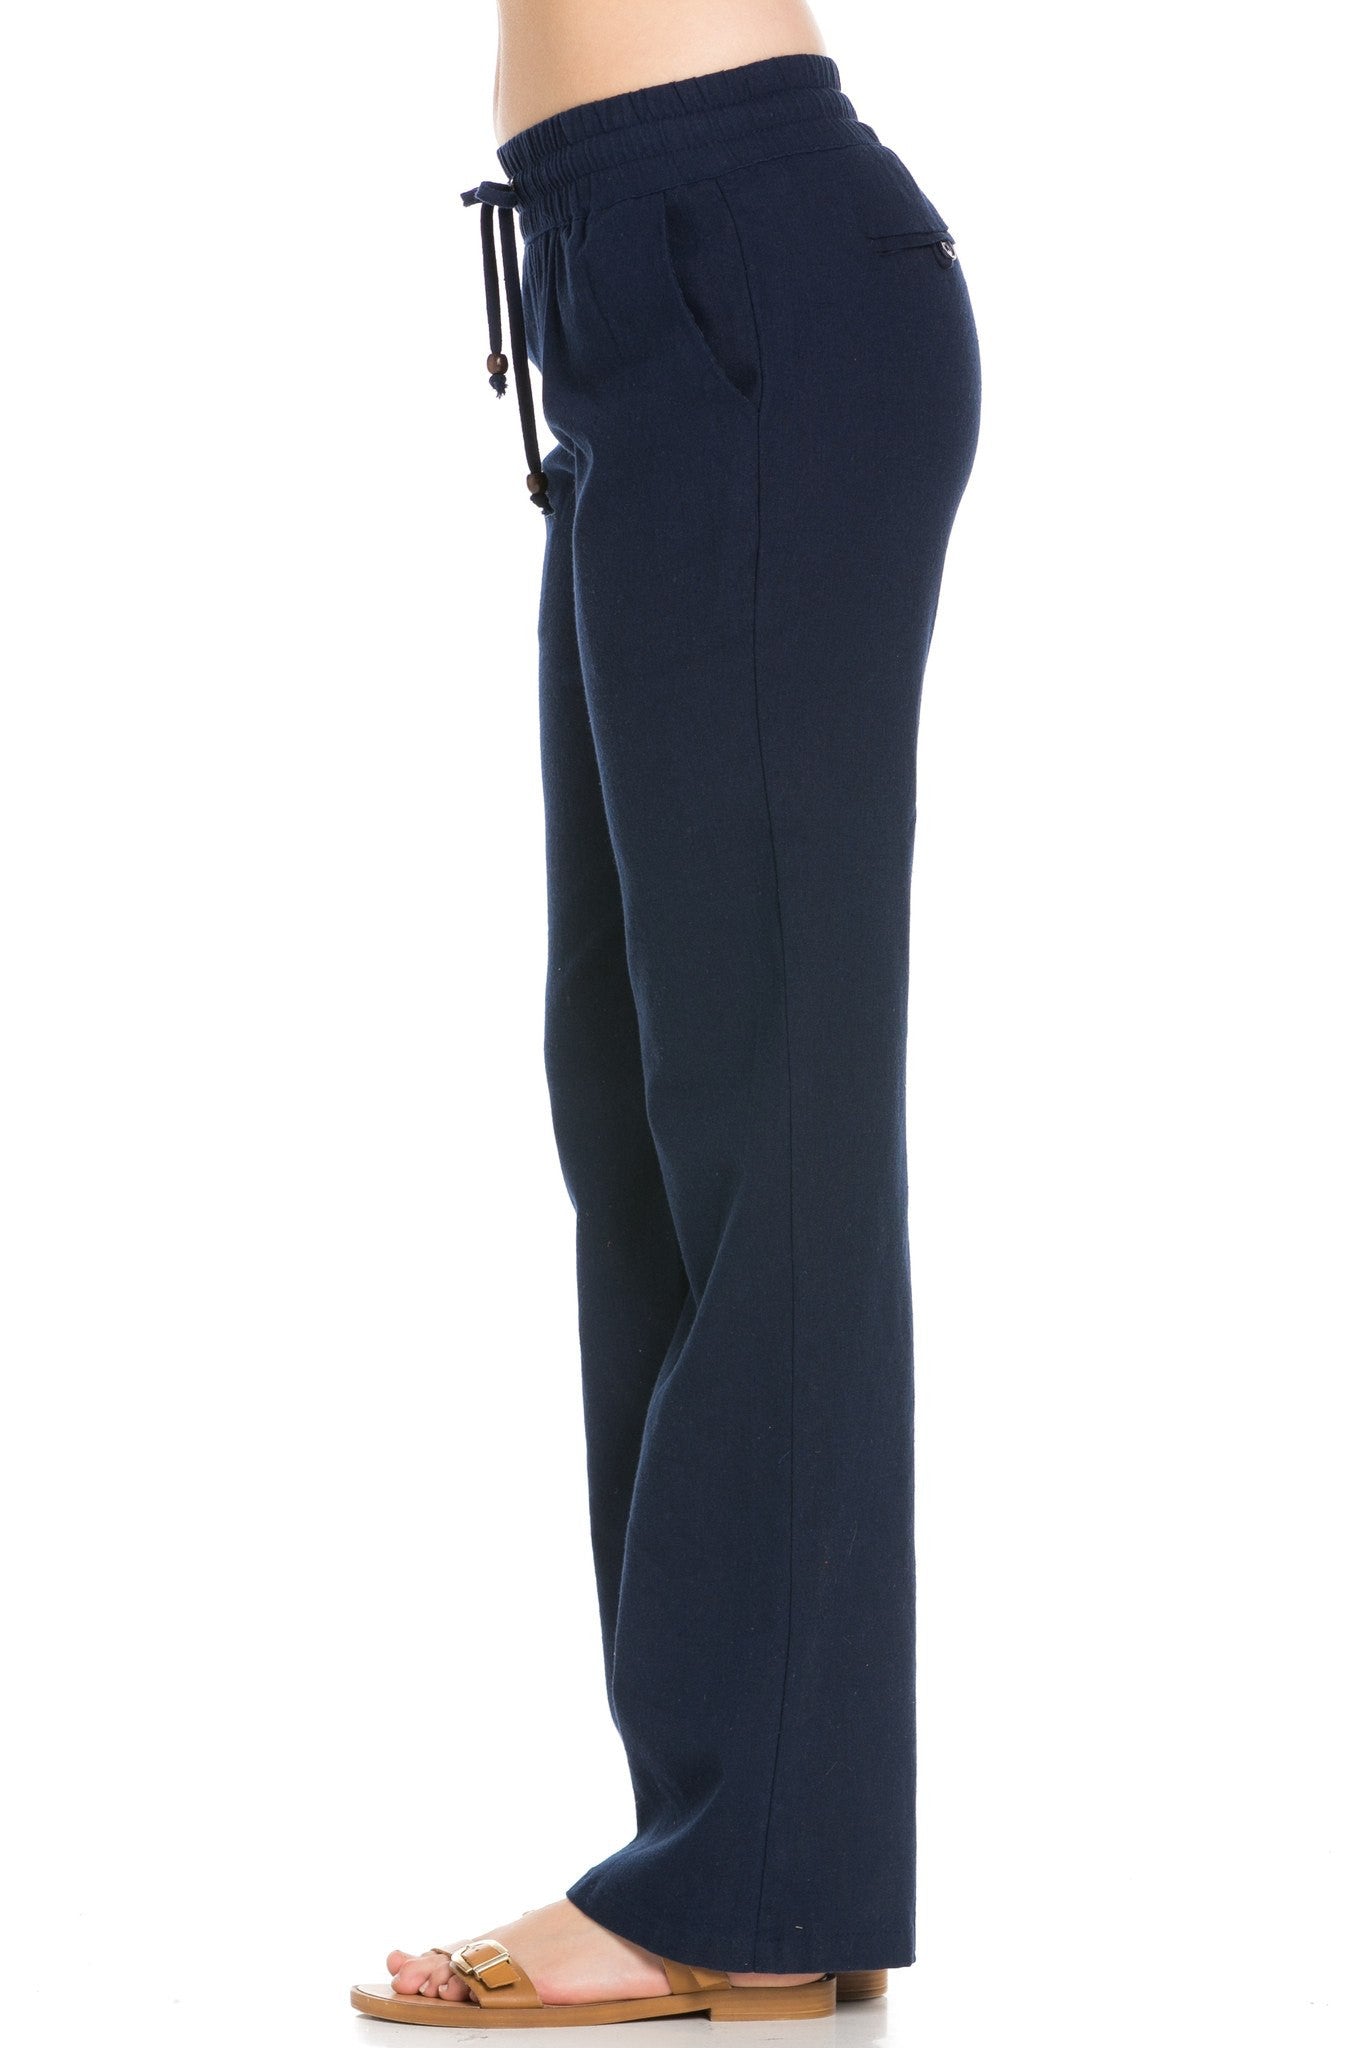 Comfy Drawstring Linen Pants Long with Band Waist (Navy) - Poplooks